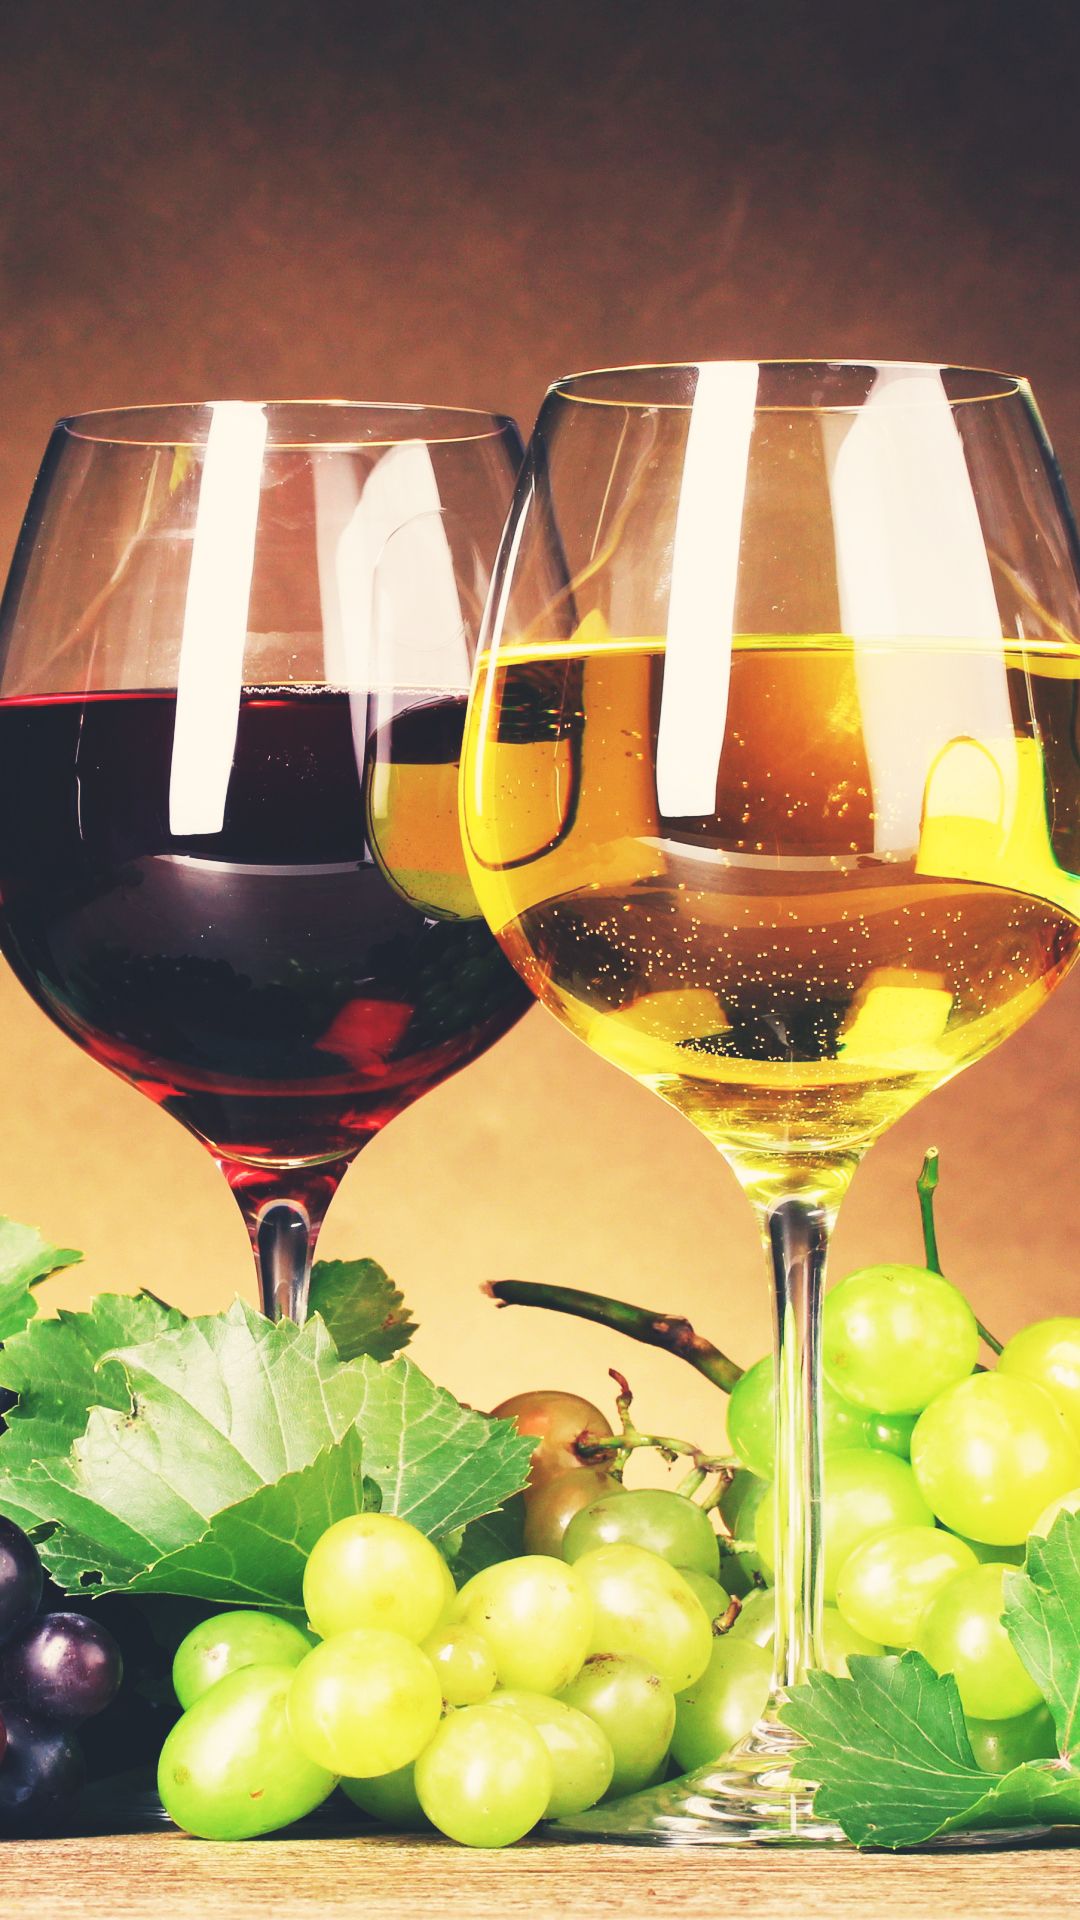 Red White Wine Glasses Grapes Android Wallpaper free download